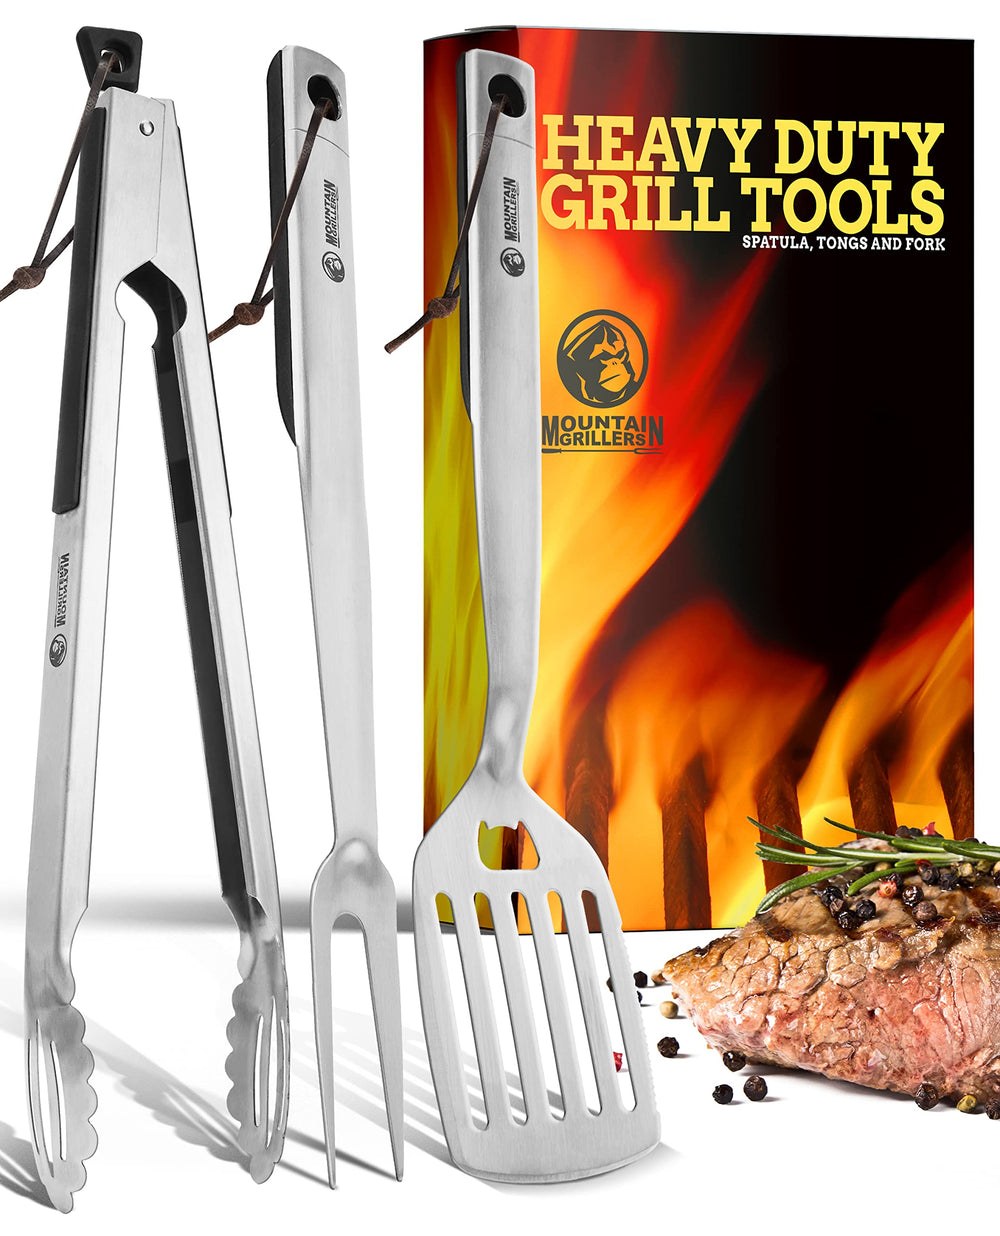 https://cdn.shopify.com/s/files/1/0065/0490/6841/products/bbq-ls-grill-set-3pack-durable-stainless-steel-grill-accessories-outlery-reusable-travel-cutlery-set-929522.jpg?v=1692088478&width=1000